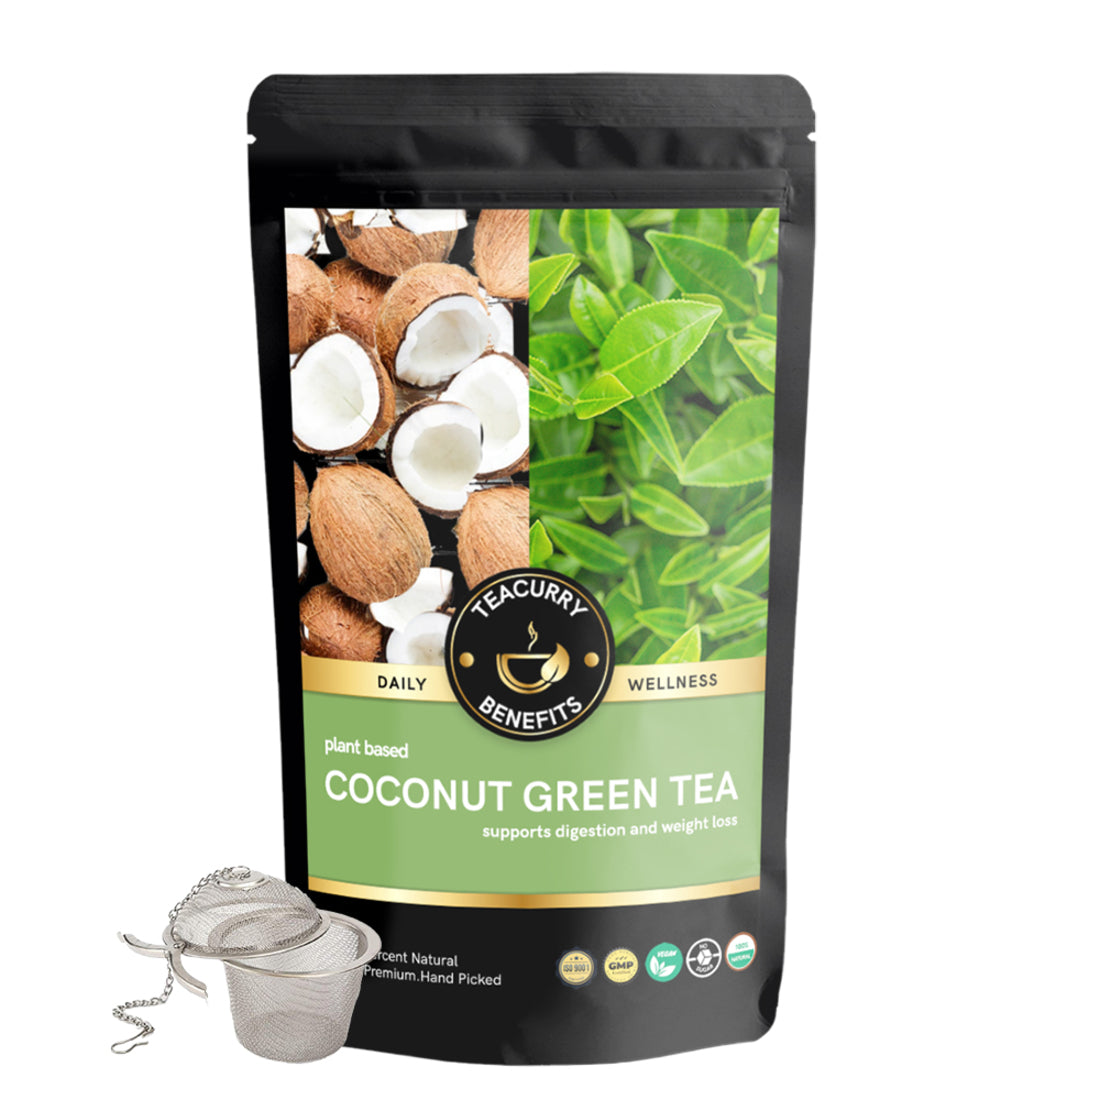 teacurry coconut green tea pouch image 